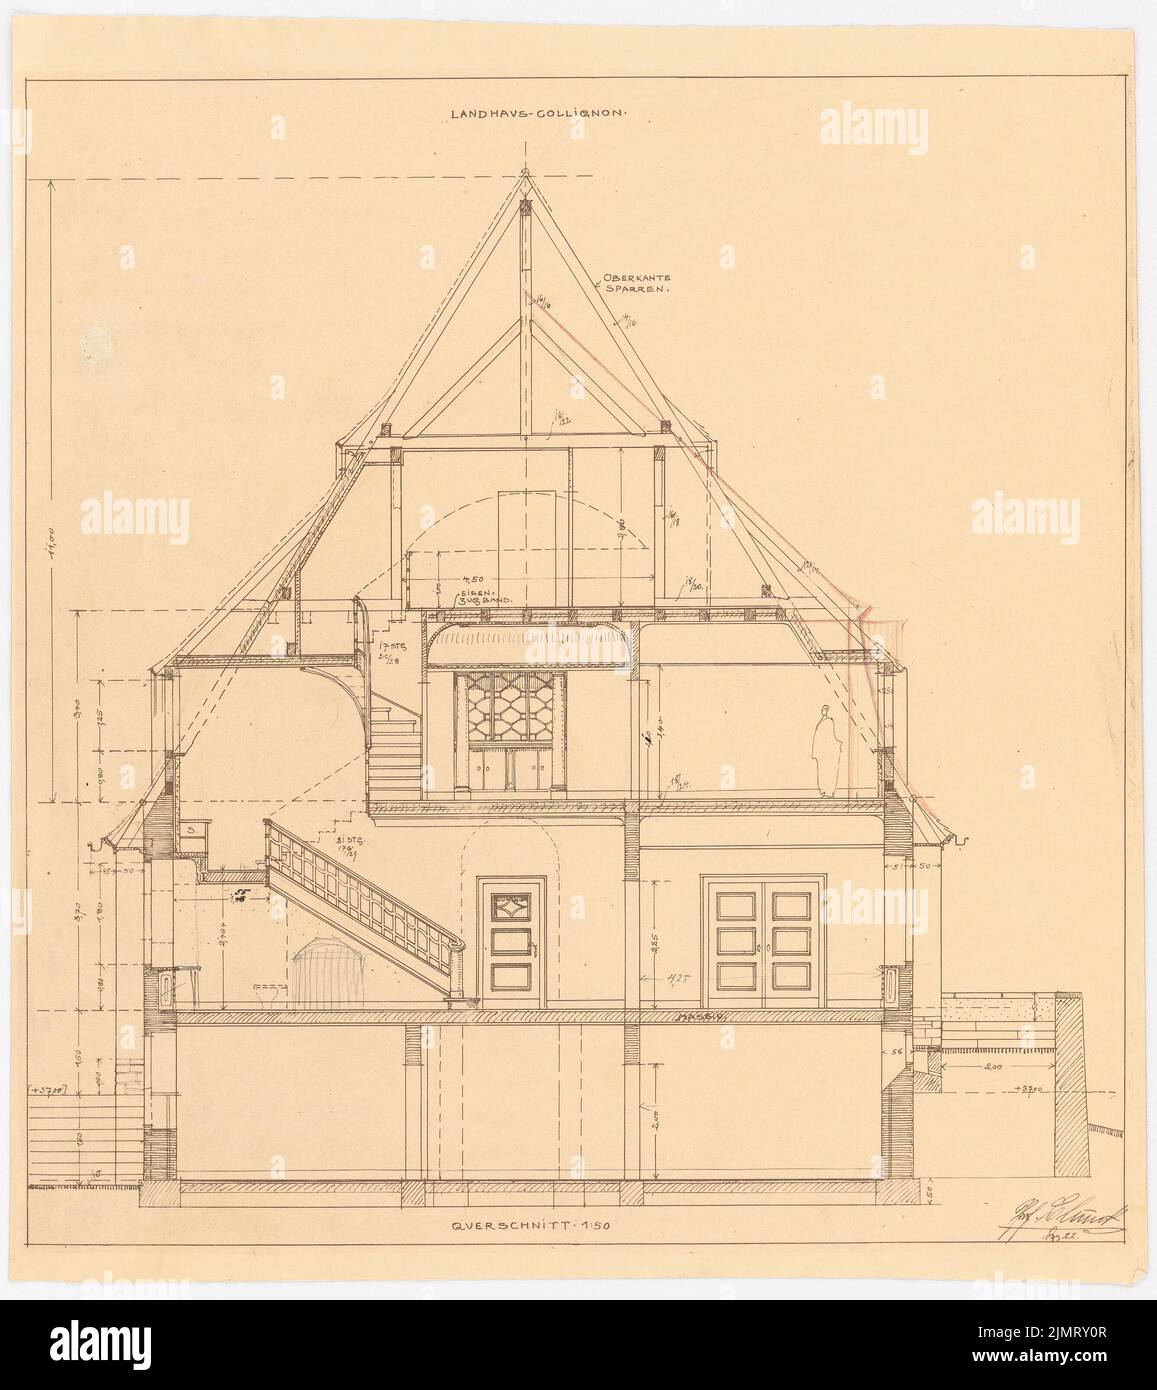 Blunck Erich (1872-1950), Haus Collignon (Doctors' House at the Heckeshorn Hospital) in Berlin-Wannsee (12.1922): cross-section 1:50. Pencil, colored pencil over light break on paper, 45.5 x 40.6 cm (including scan edges) Blunck Erich  (1872-1950): Haus Collignon (Ärztewohnhaus am Krankenhaus Heckeshorn), Berlin-Wannsee Stock Photo